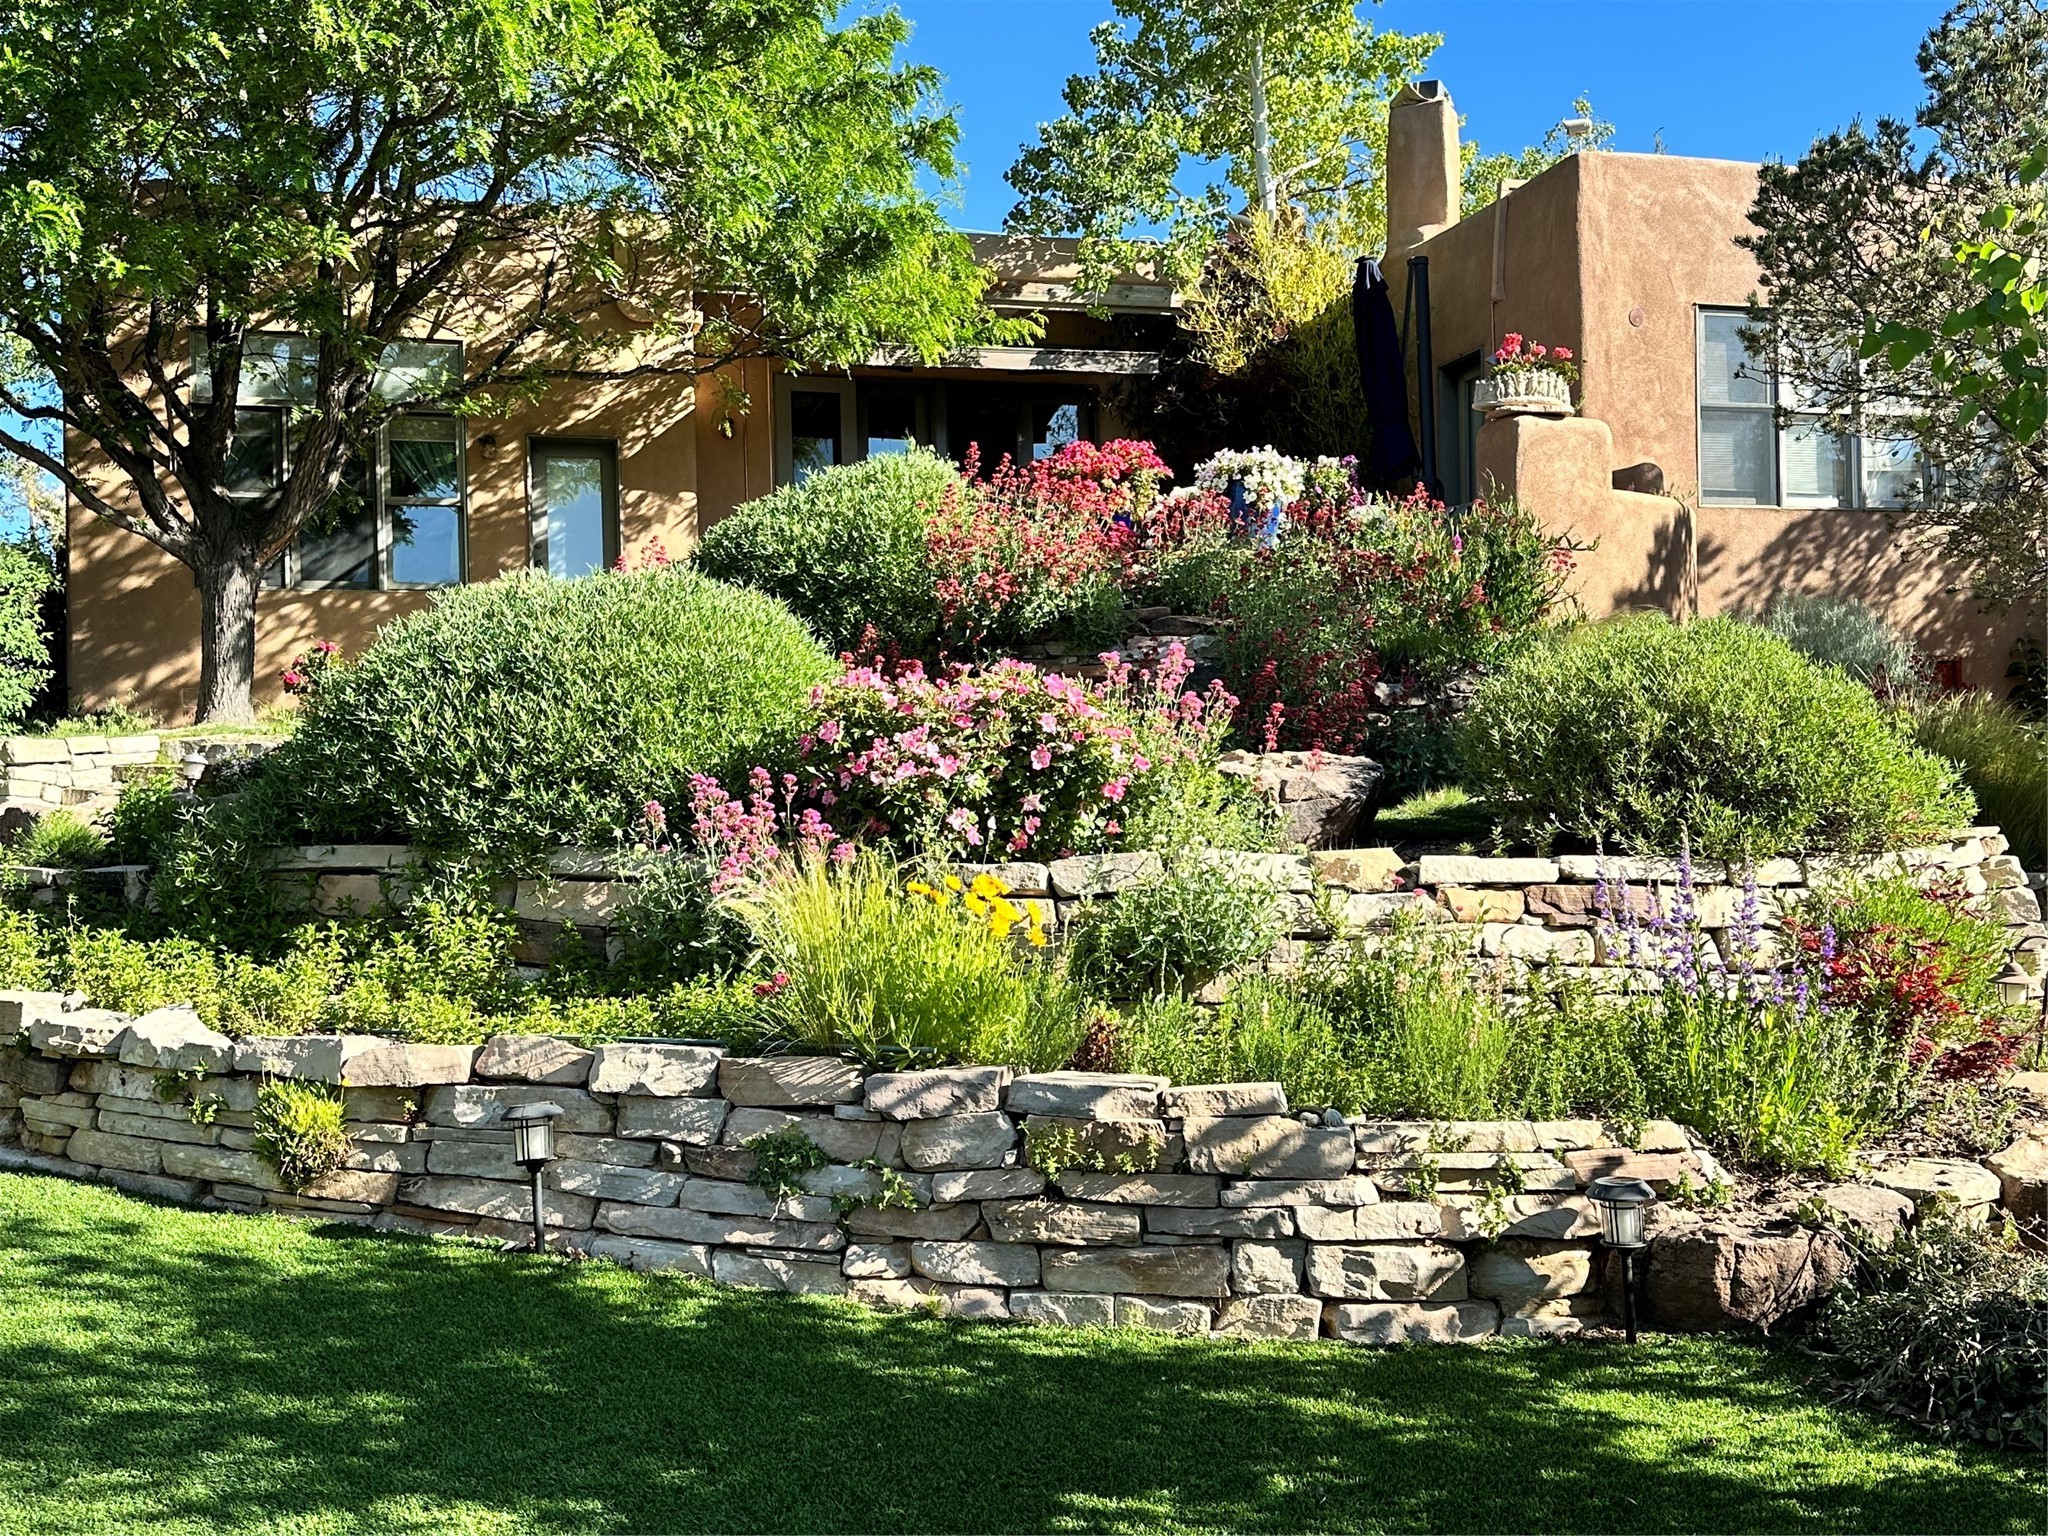 Perennial gardens, xeriscape, mature trees, and rock terraces